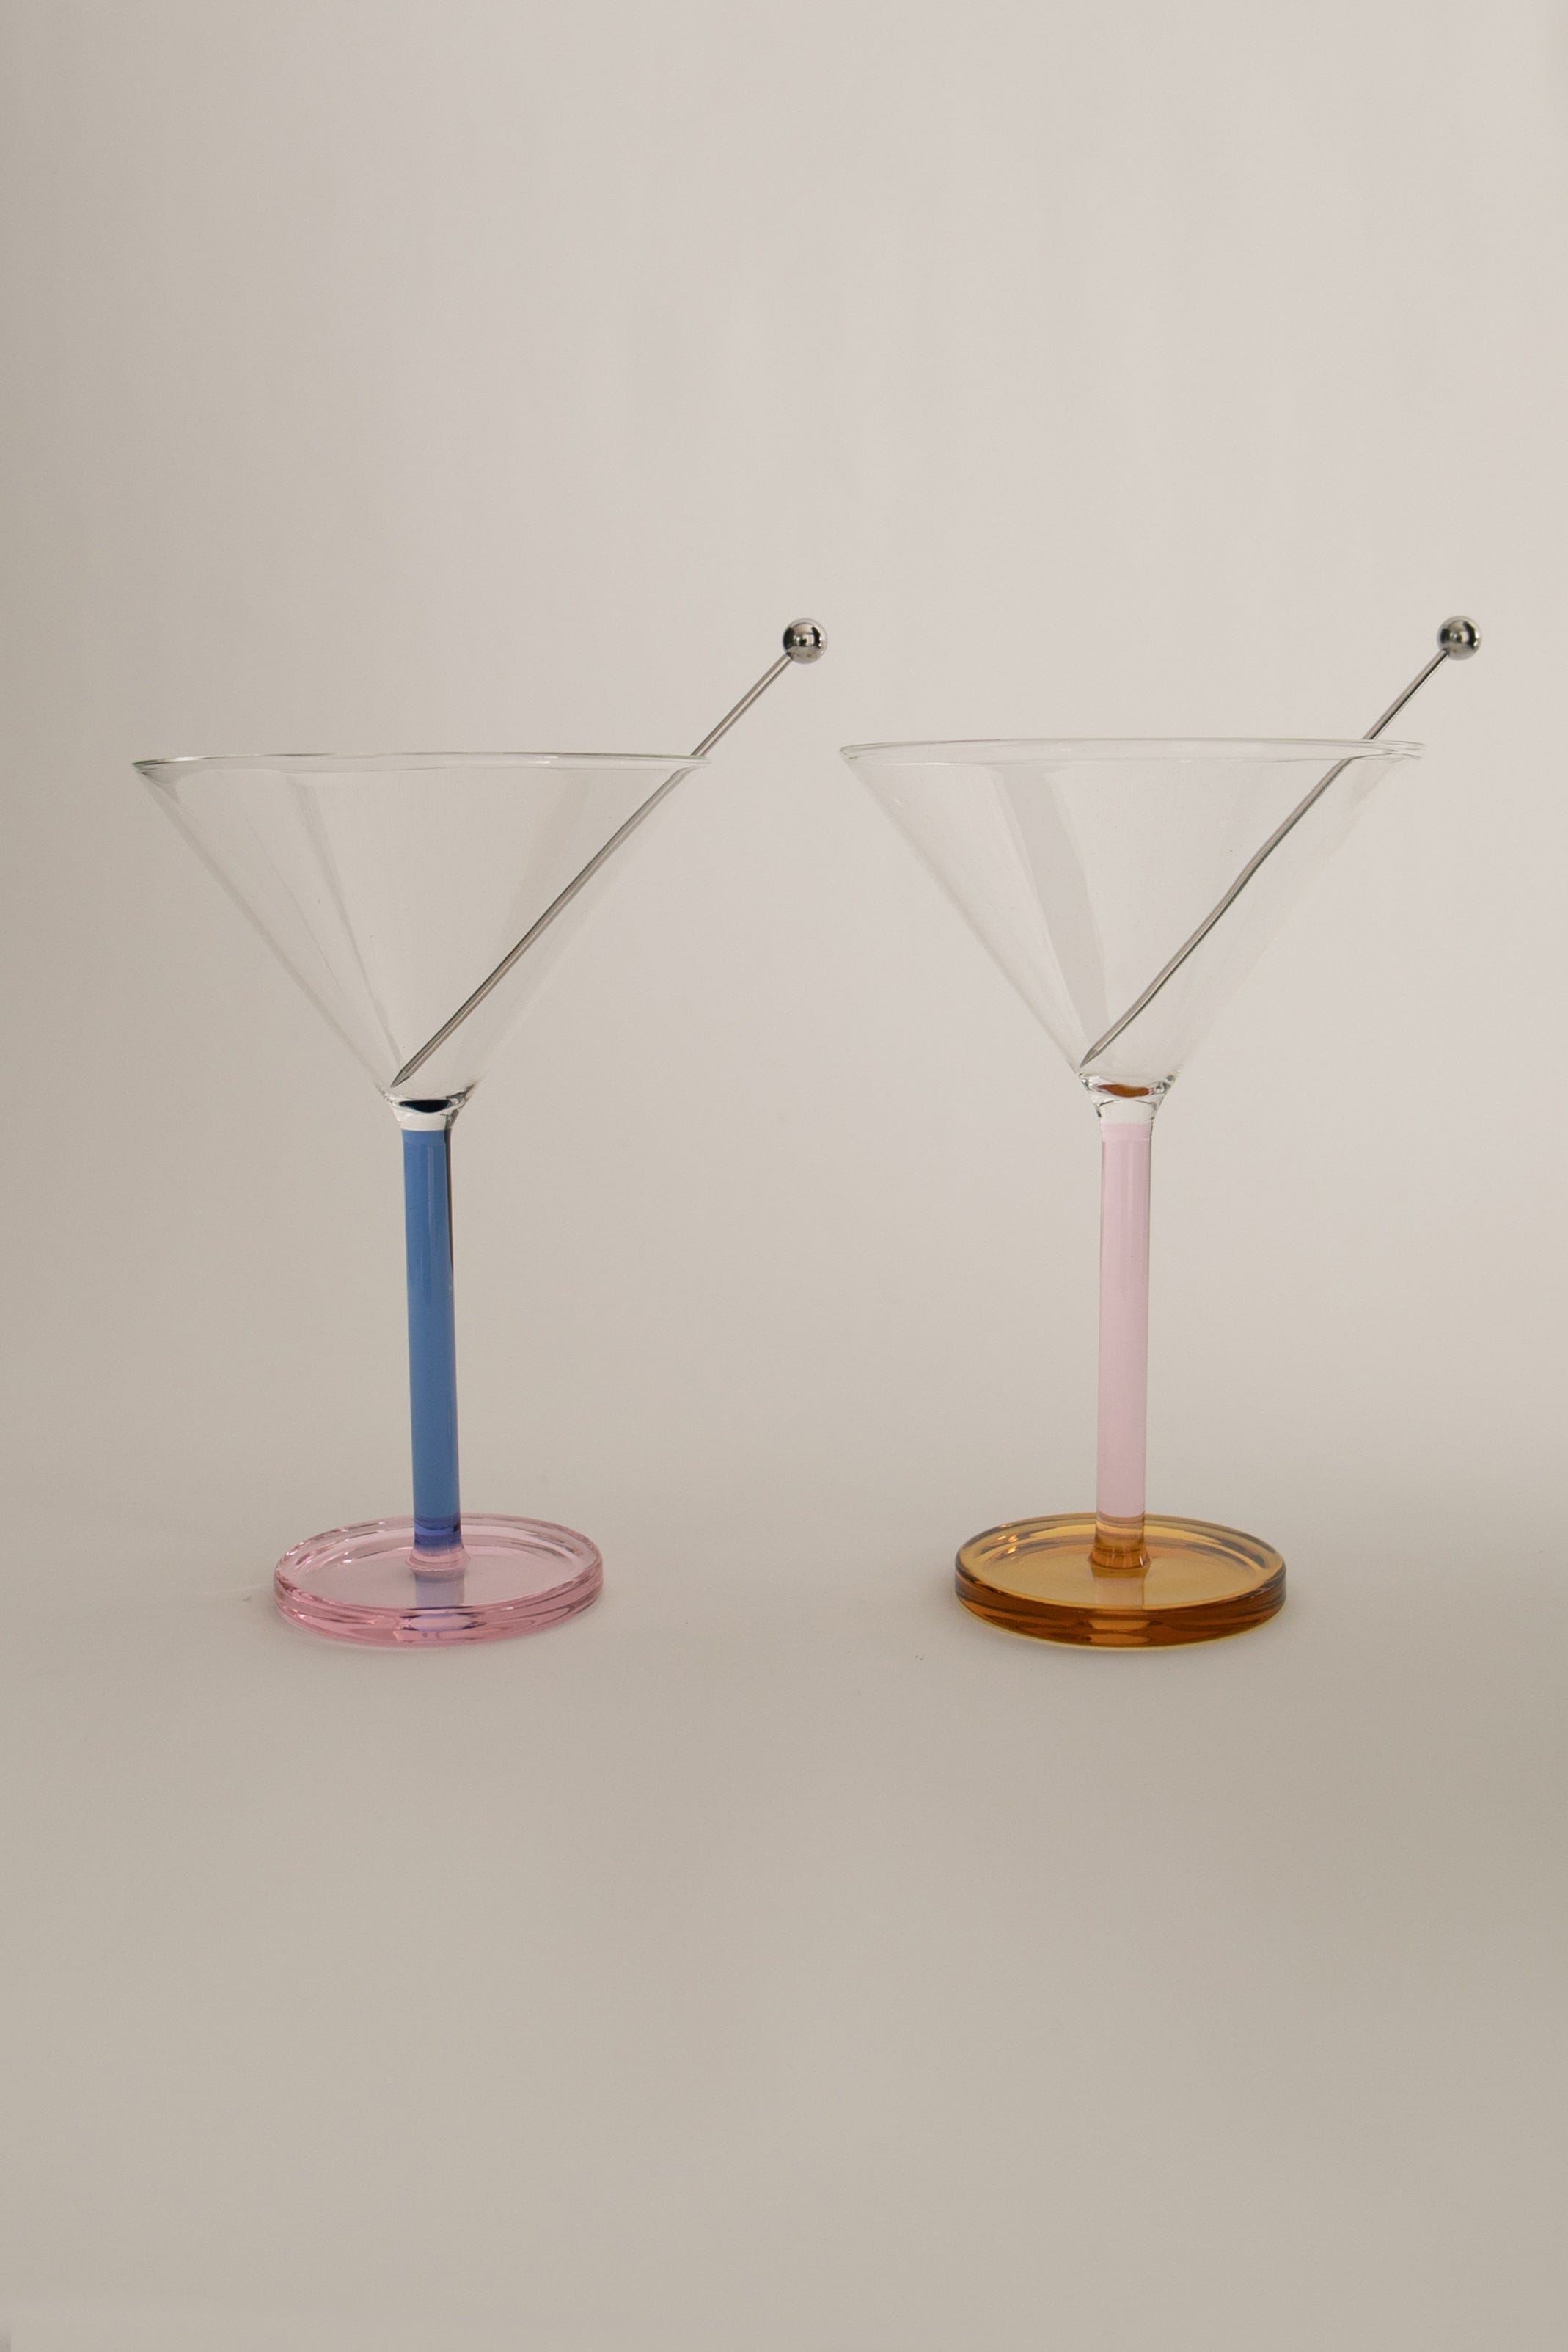 Two Piano cocktail glasses with colorful stems, one pink and one blue, against a light neutral background. The glasses are empty and have stainless steel garnish skewers as decorations on their rims.